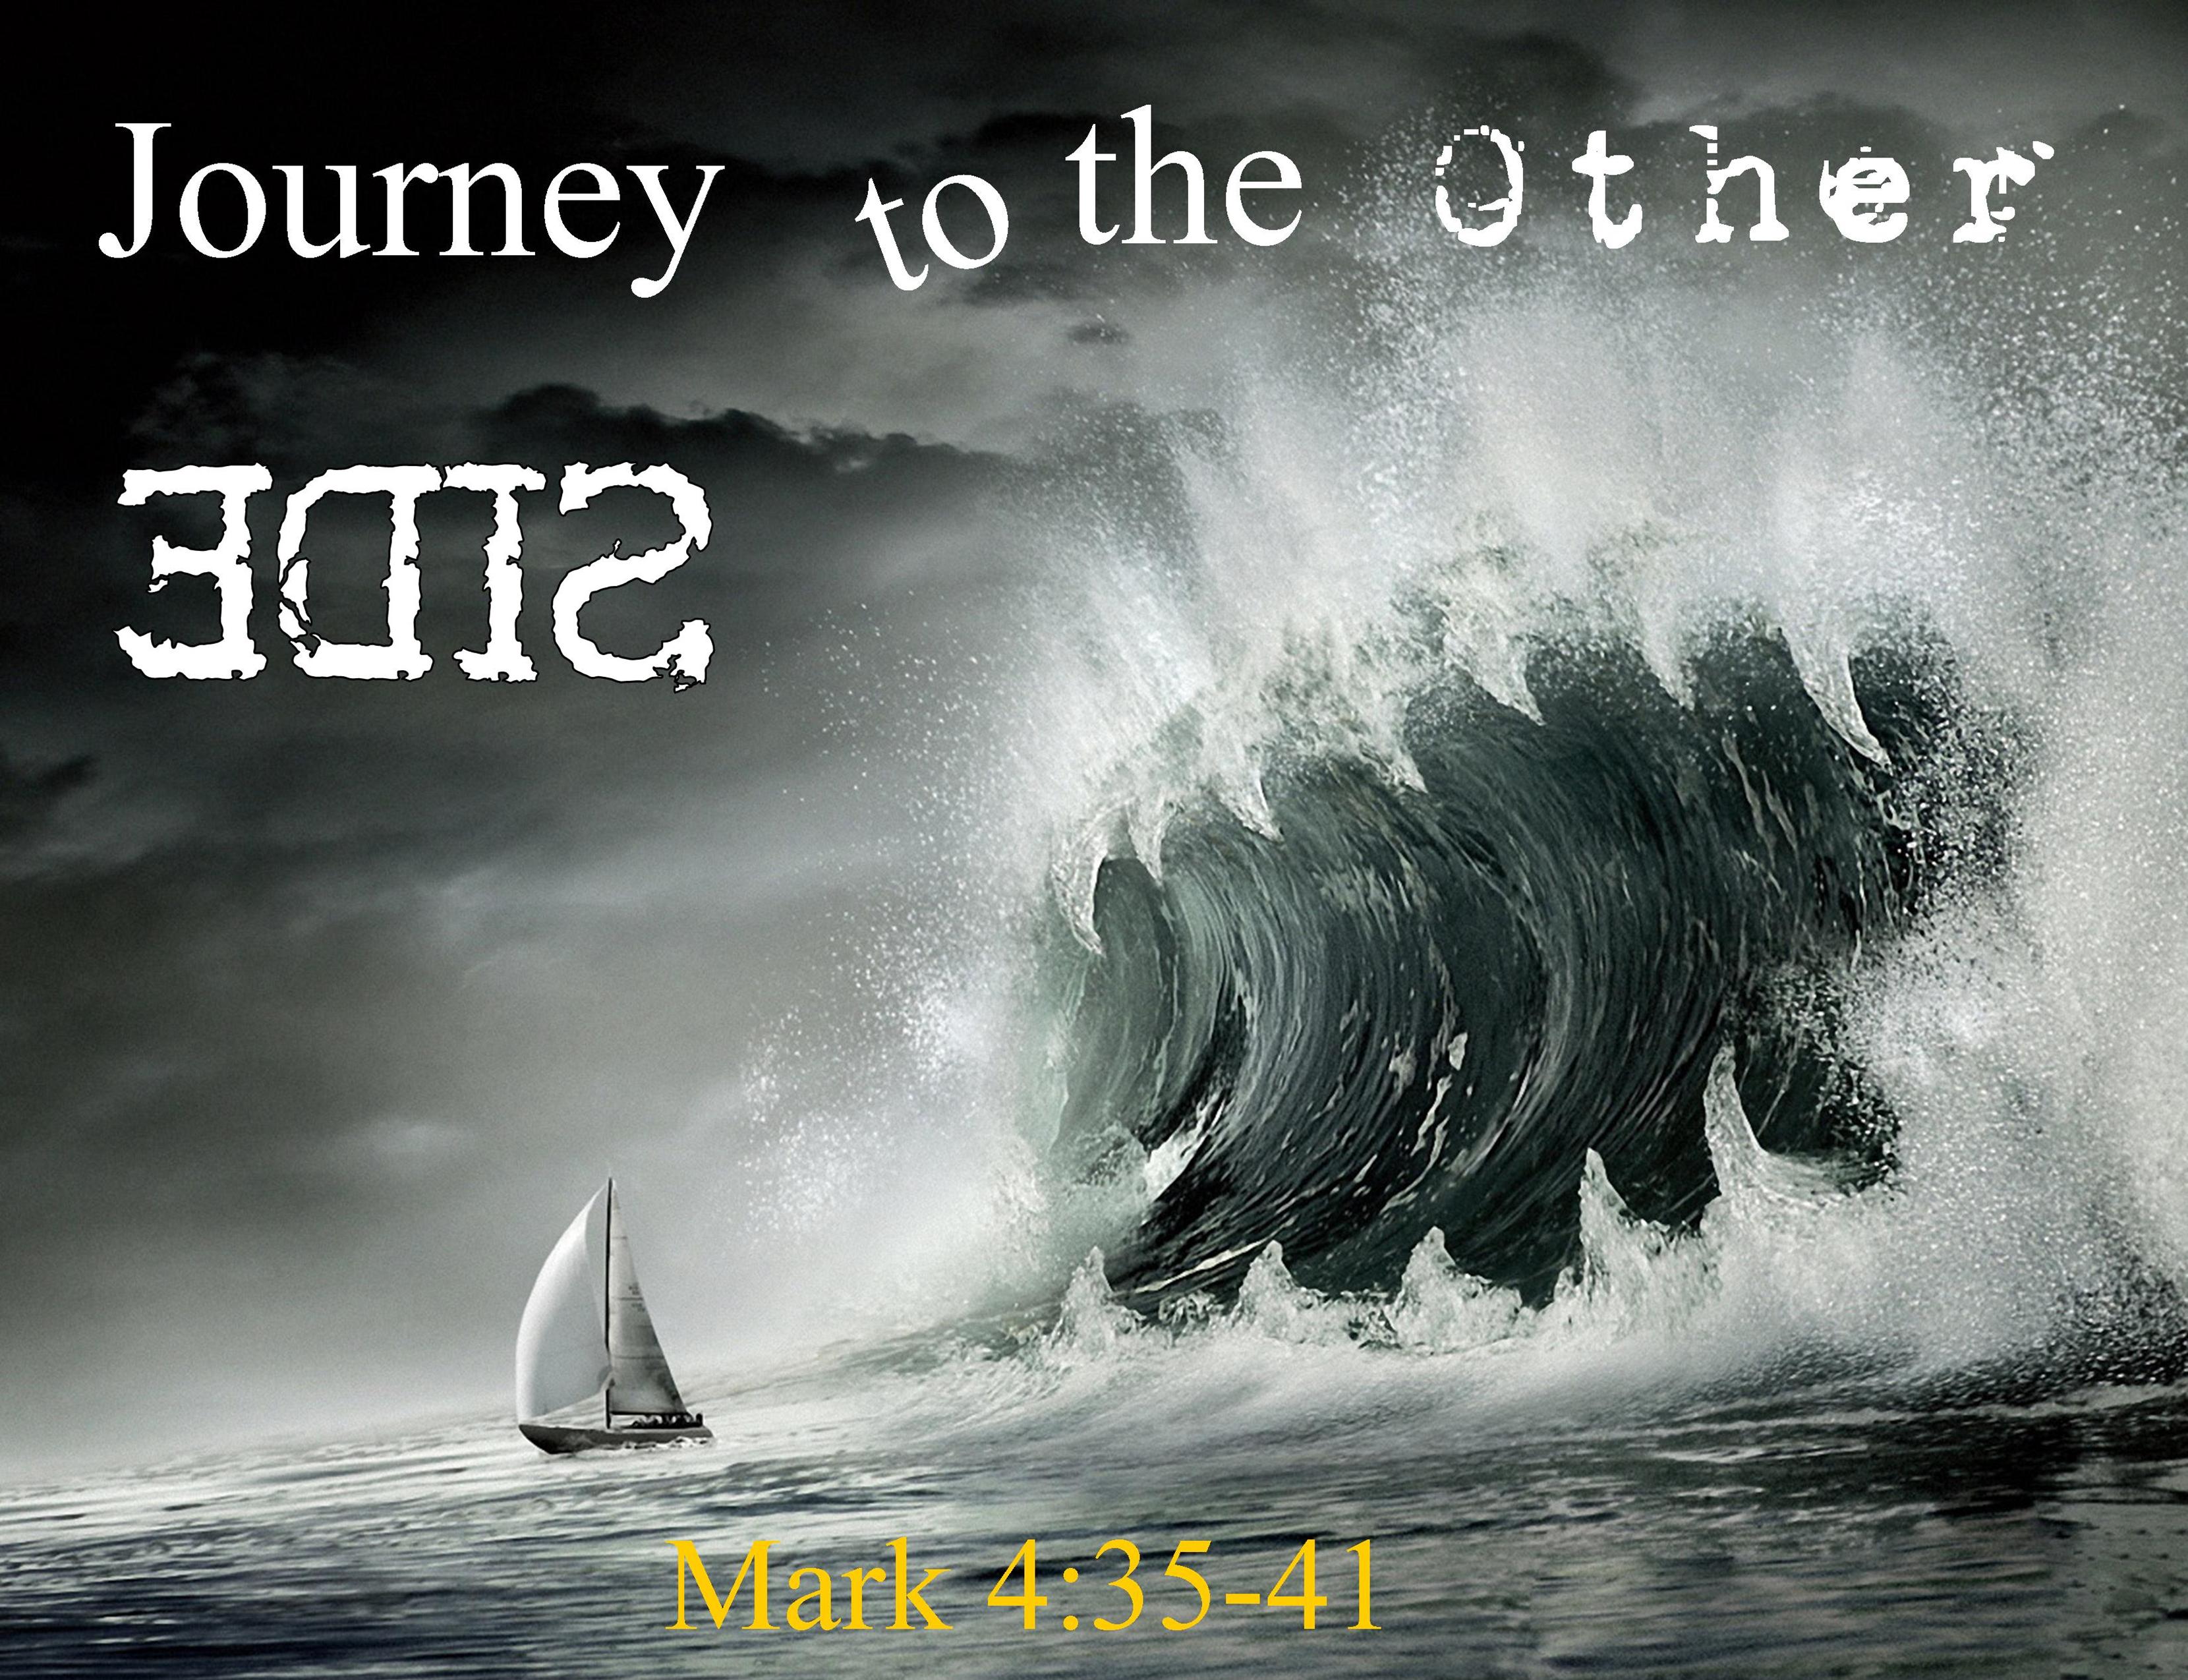 Mark 4:35-41, Journey To The Other Side